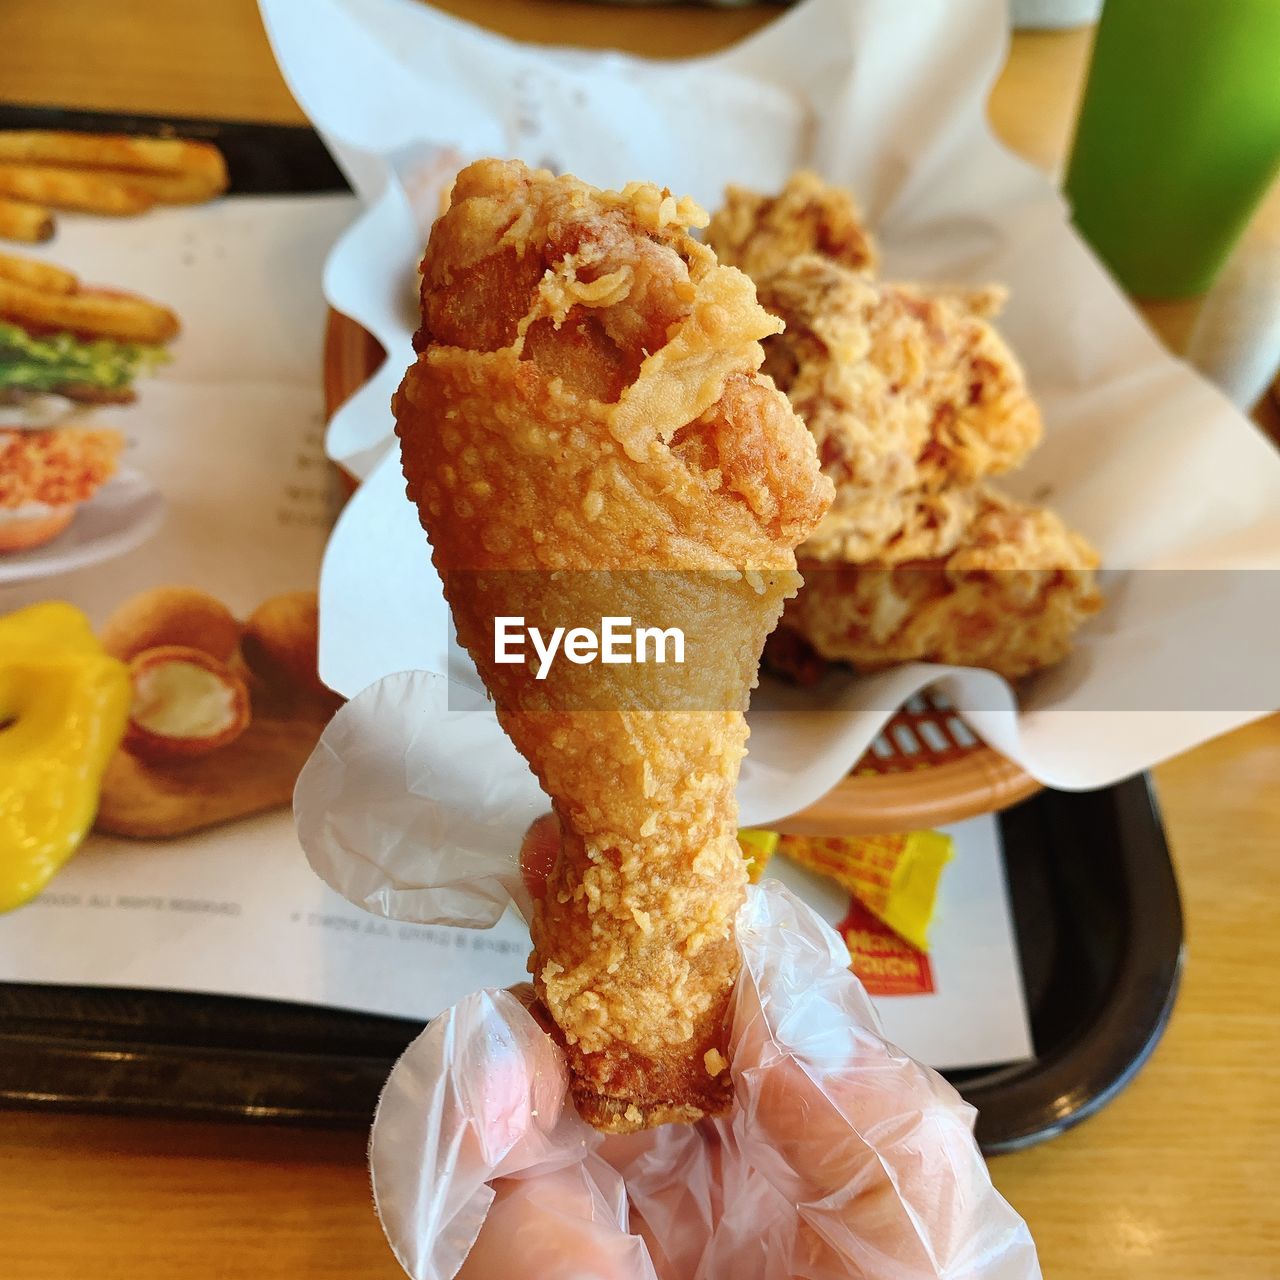 HIGH ANGLE VIEW OF HAND HOLDING FOOD